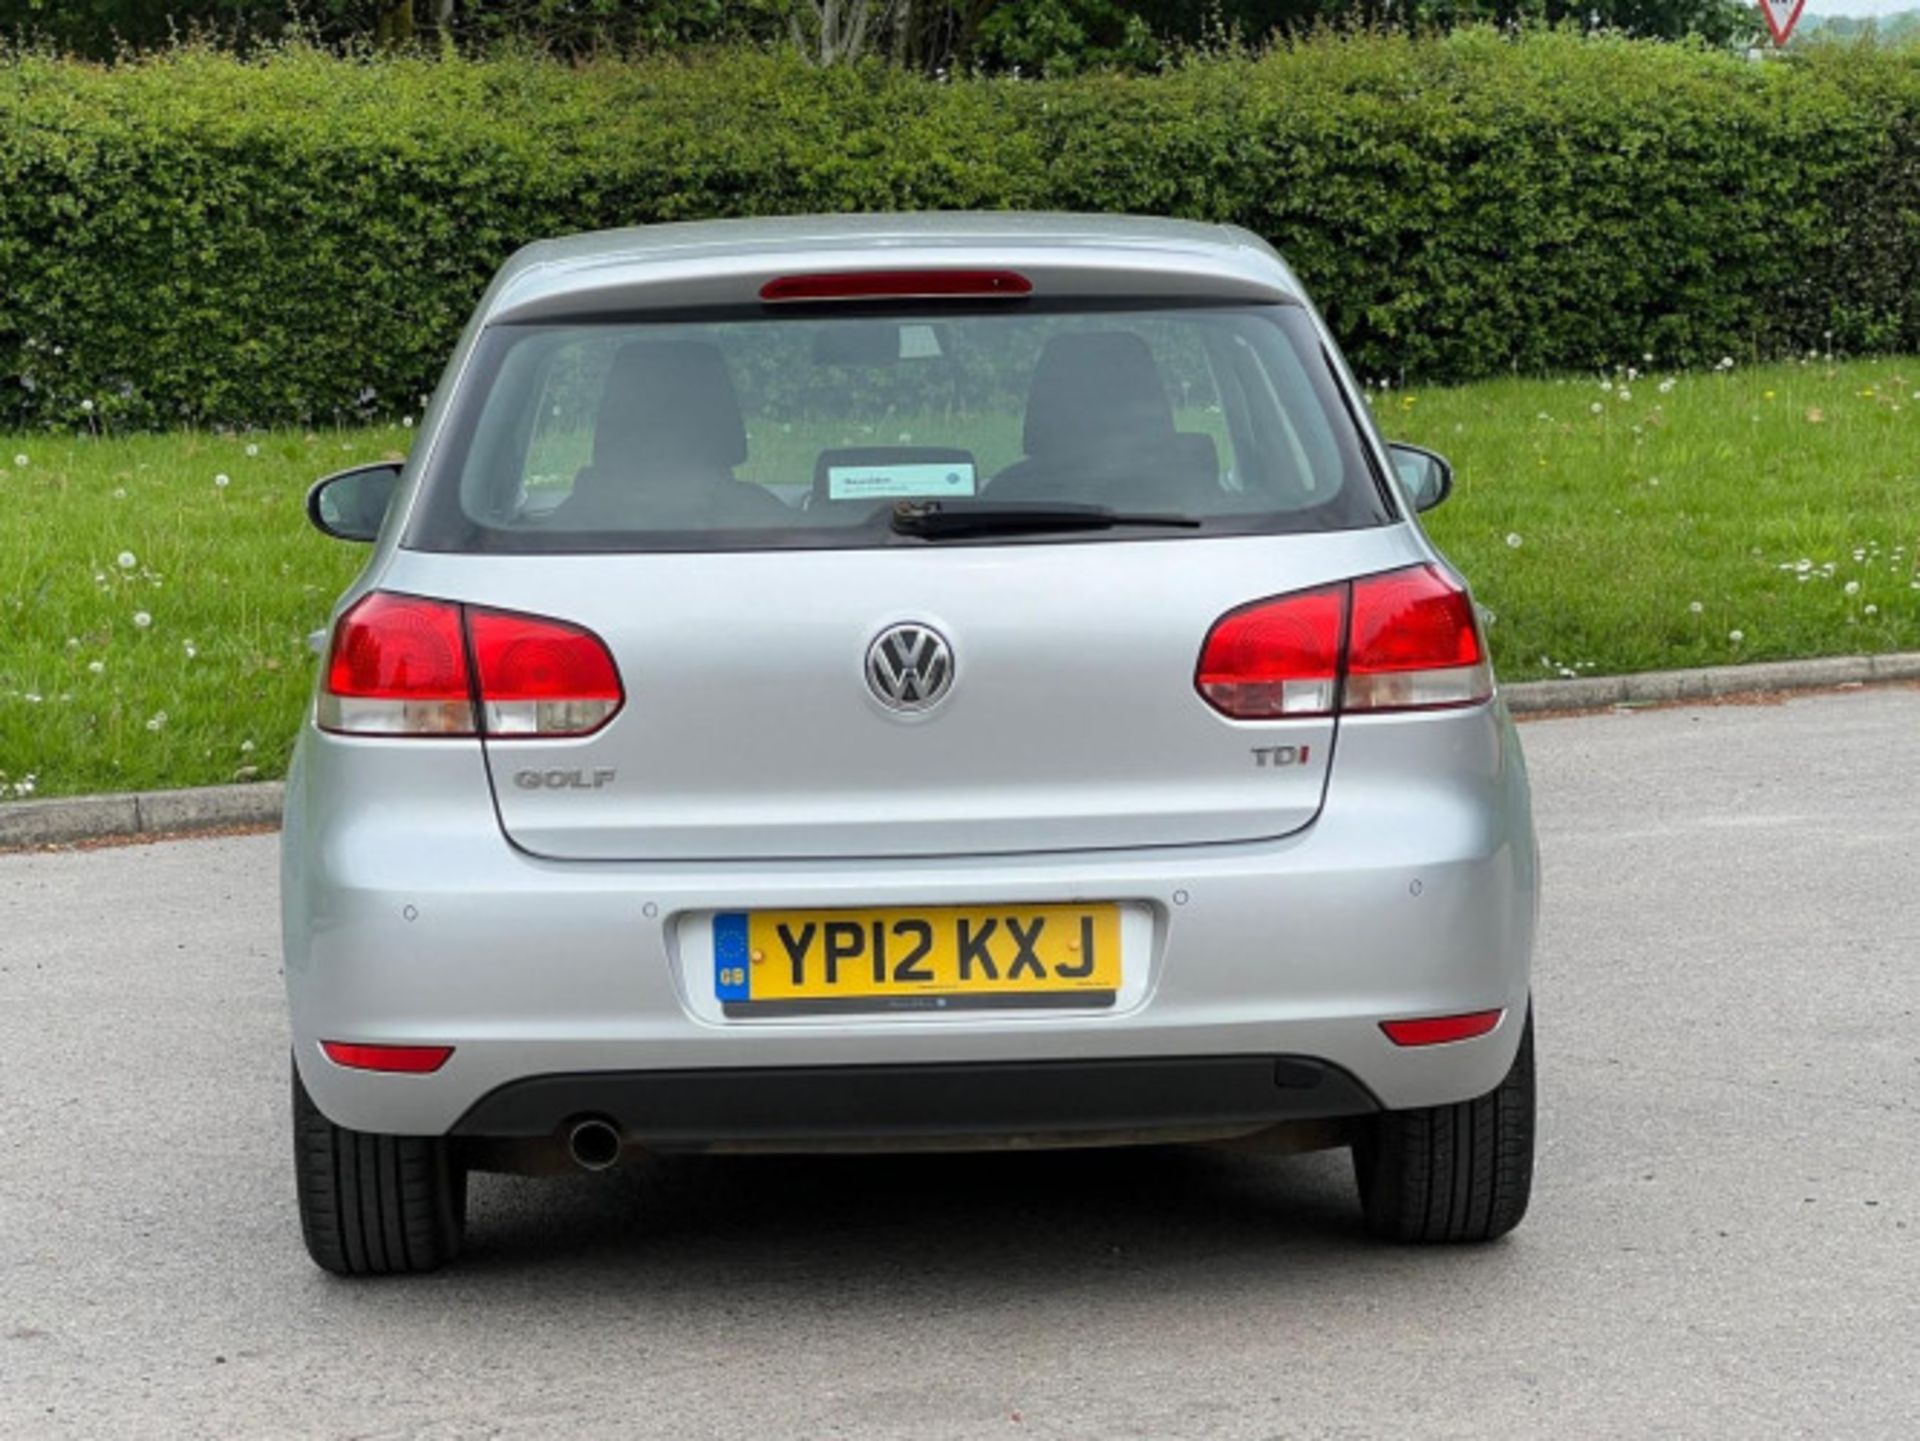 IMPECCABLE 2012 VOLKSWAGEN GOLF 1.6 TDI MATCH >>--NO VAT ON HAMMER--<< - Image 8 of 116